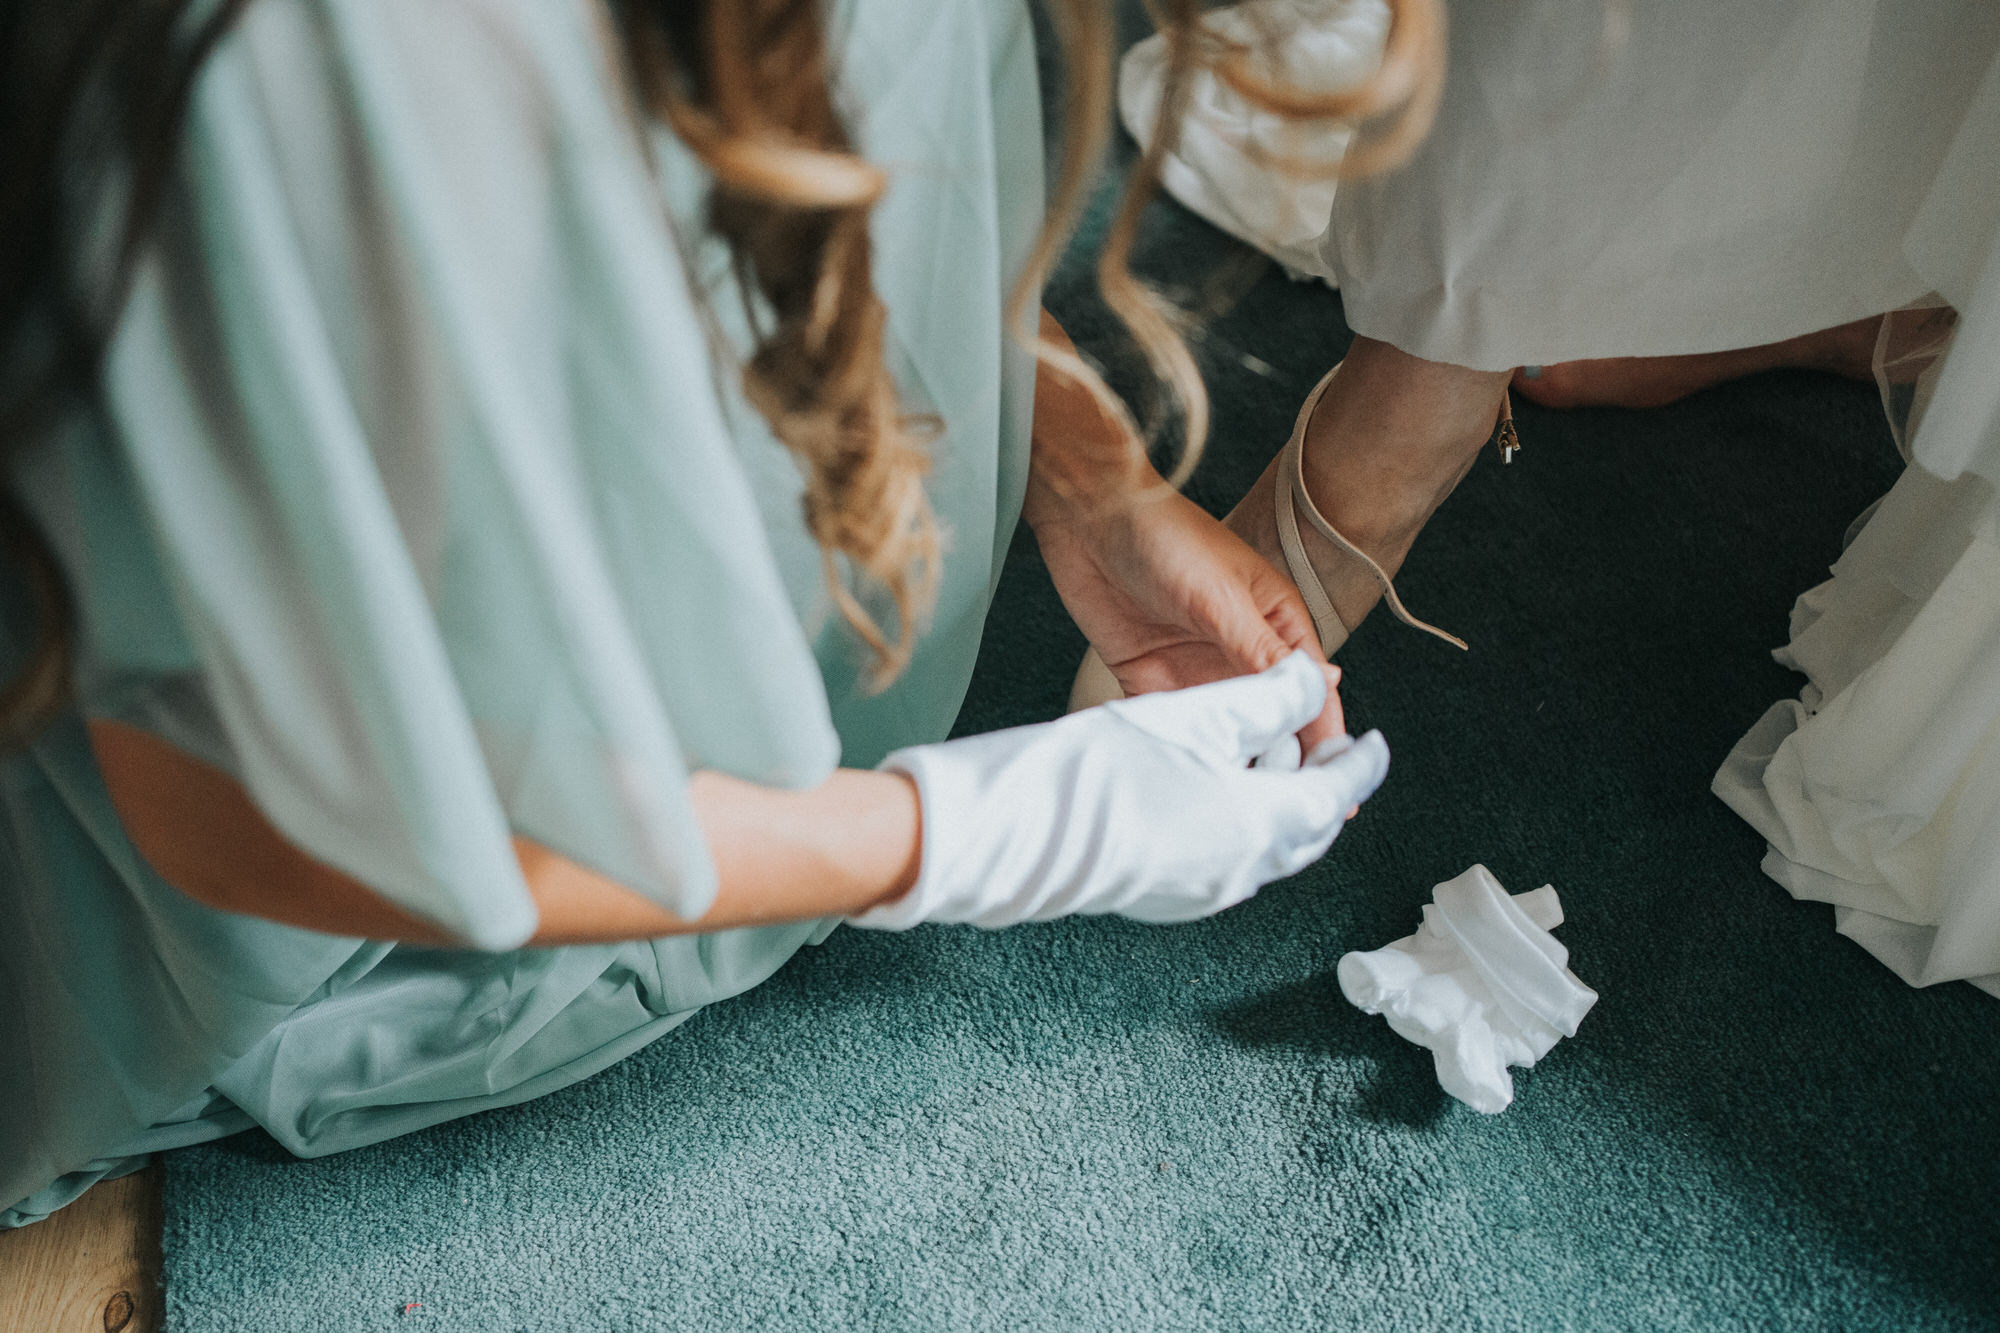 A bridesmaid helps the bride with her shoes